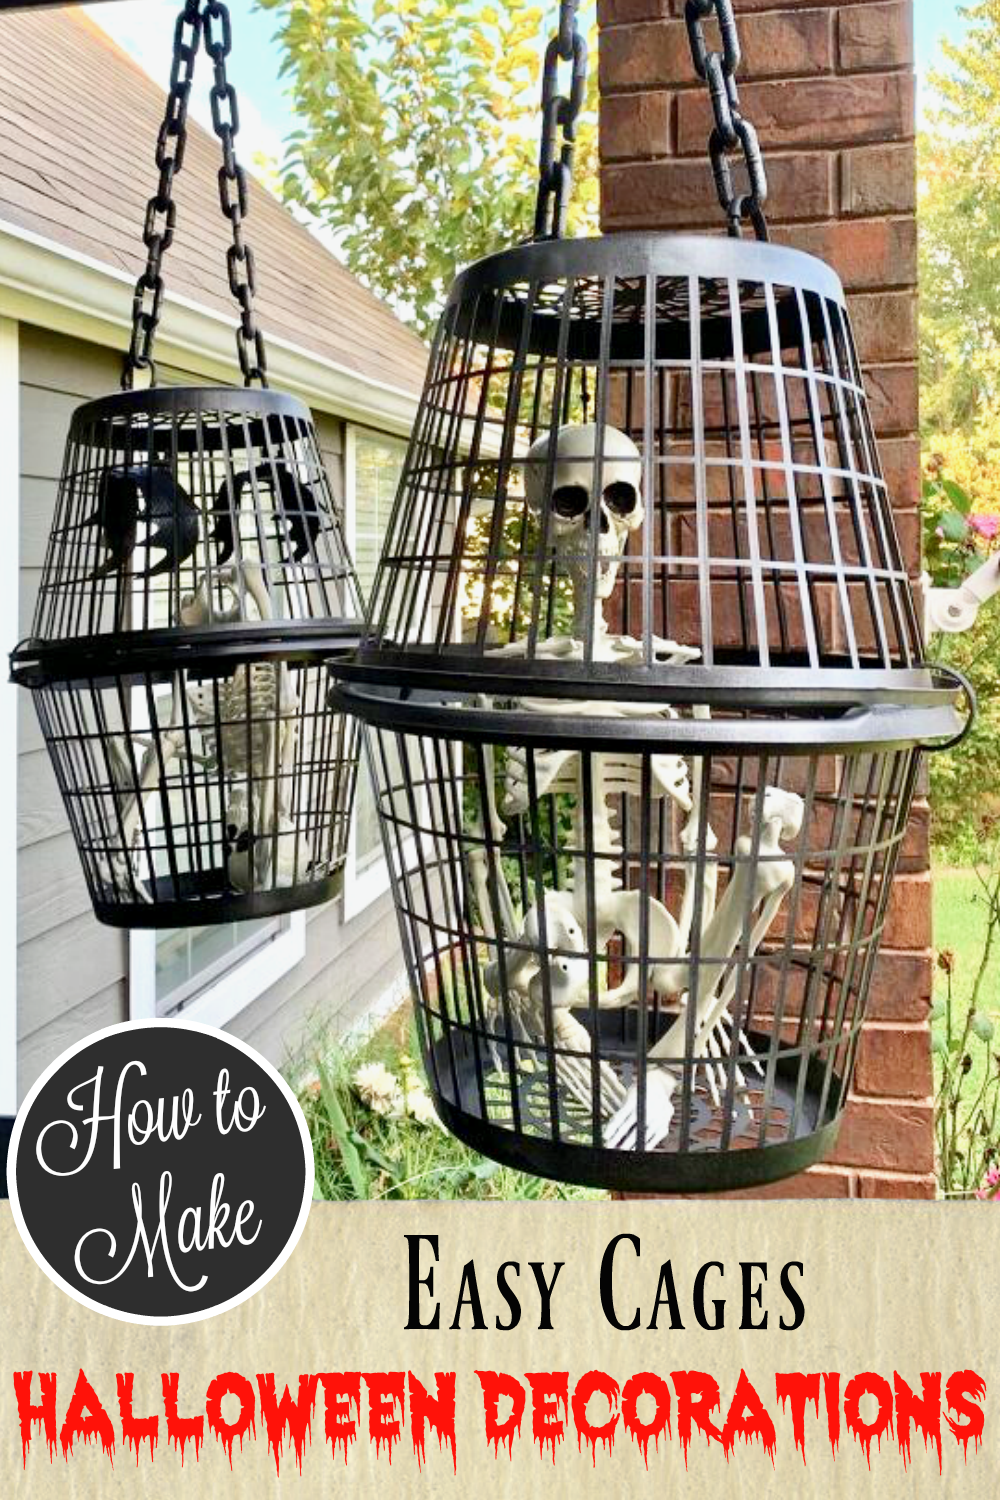 Take your skeletons out of the closet!  How to Make Cage Halloween Decorations!  Easy Halloween DIY! - Take your skeletons out of the closet!  How to Make Cage Halloween Decorations!  Easy Halloween DIY! -   19 diy Crafts halloween ideas